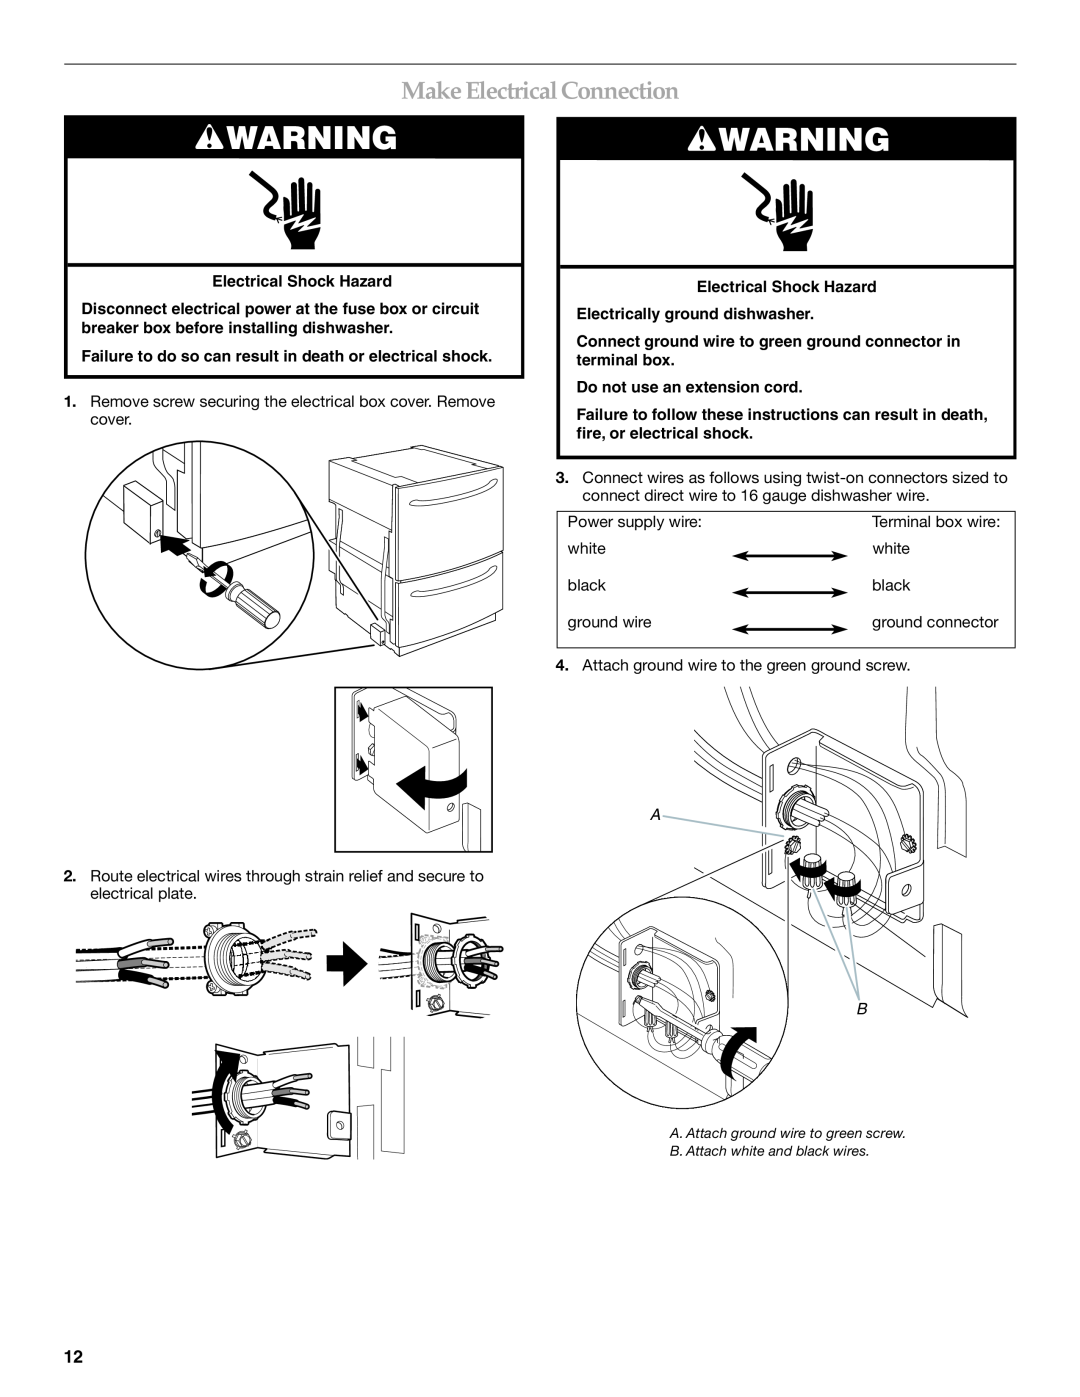 KitchenAid W10118037B installation instructions Make Electrical Connection, Terminal box wire 